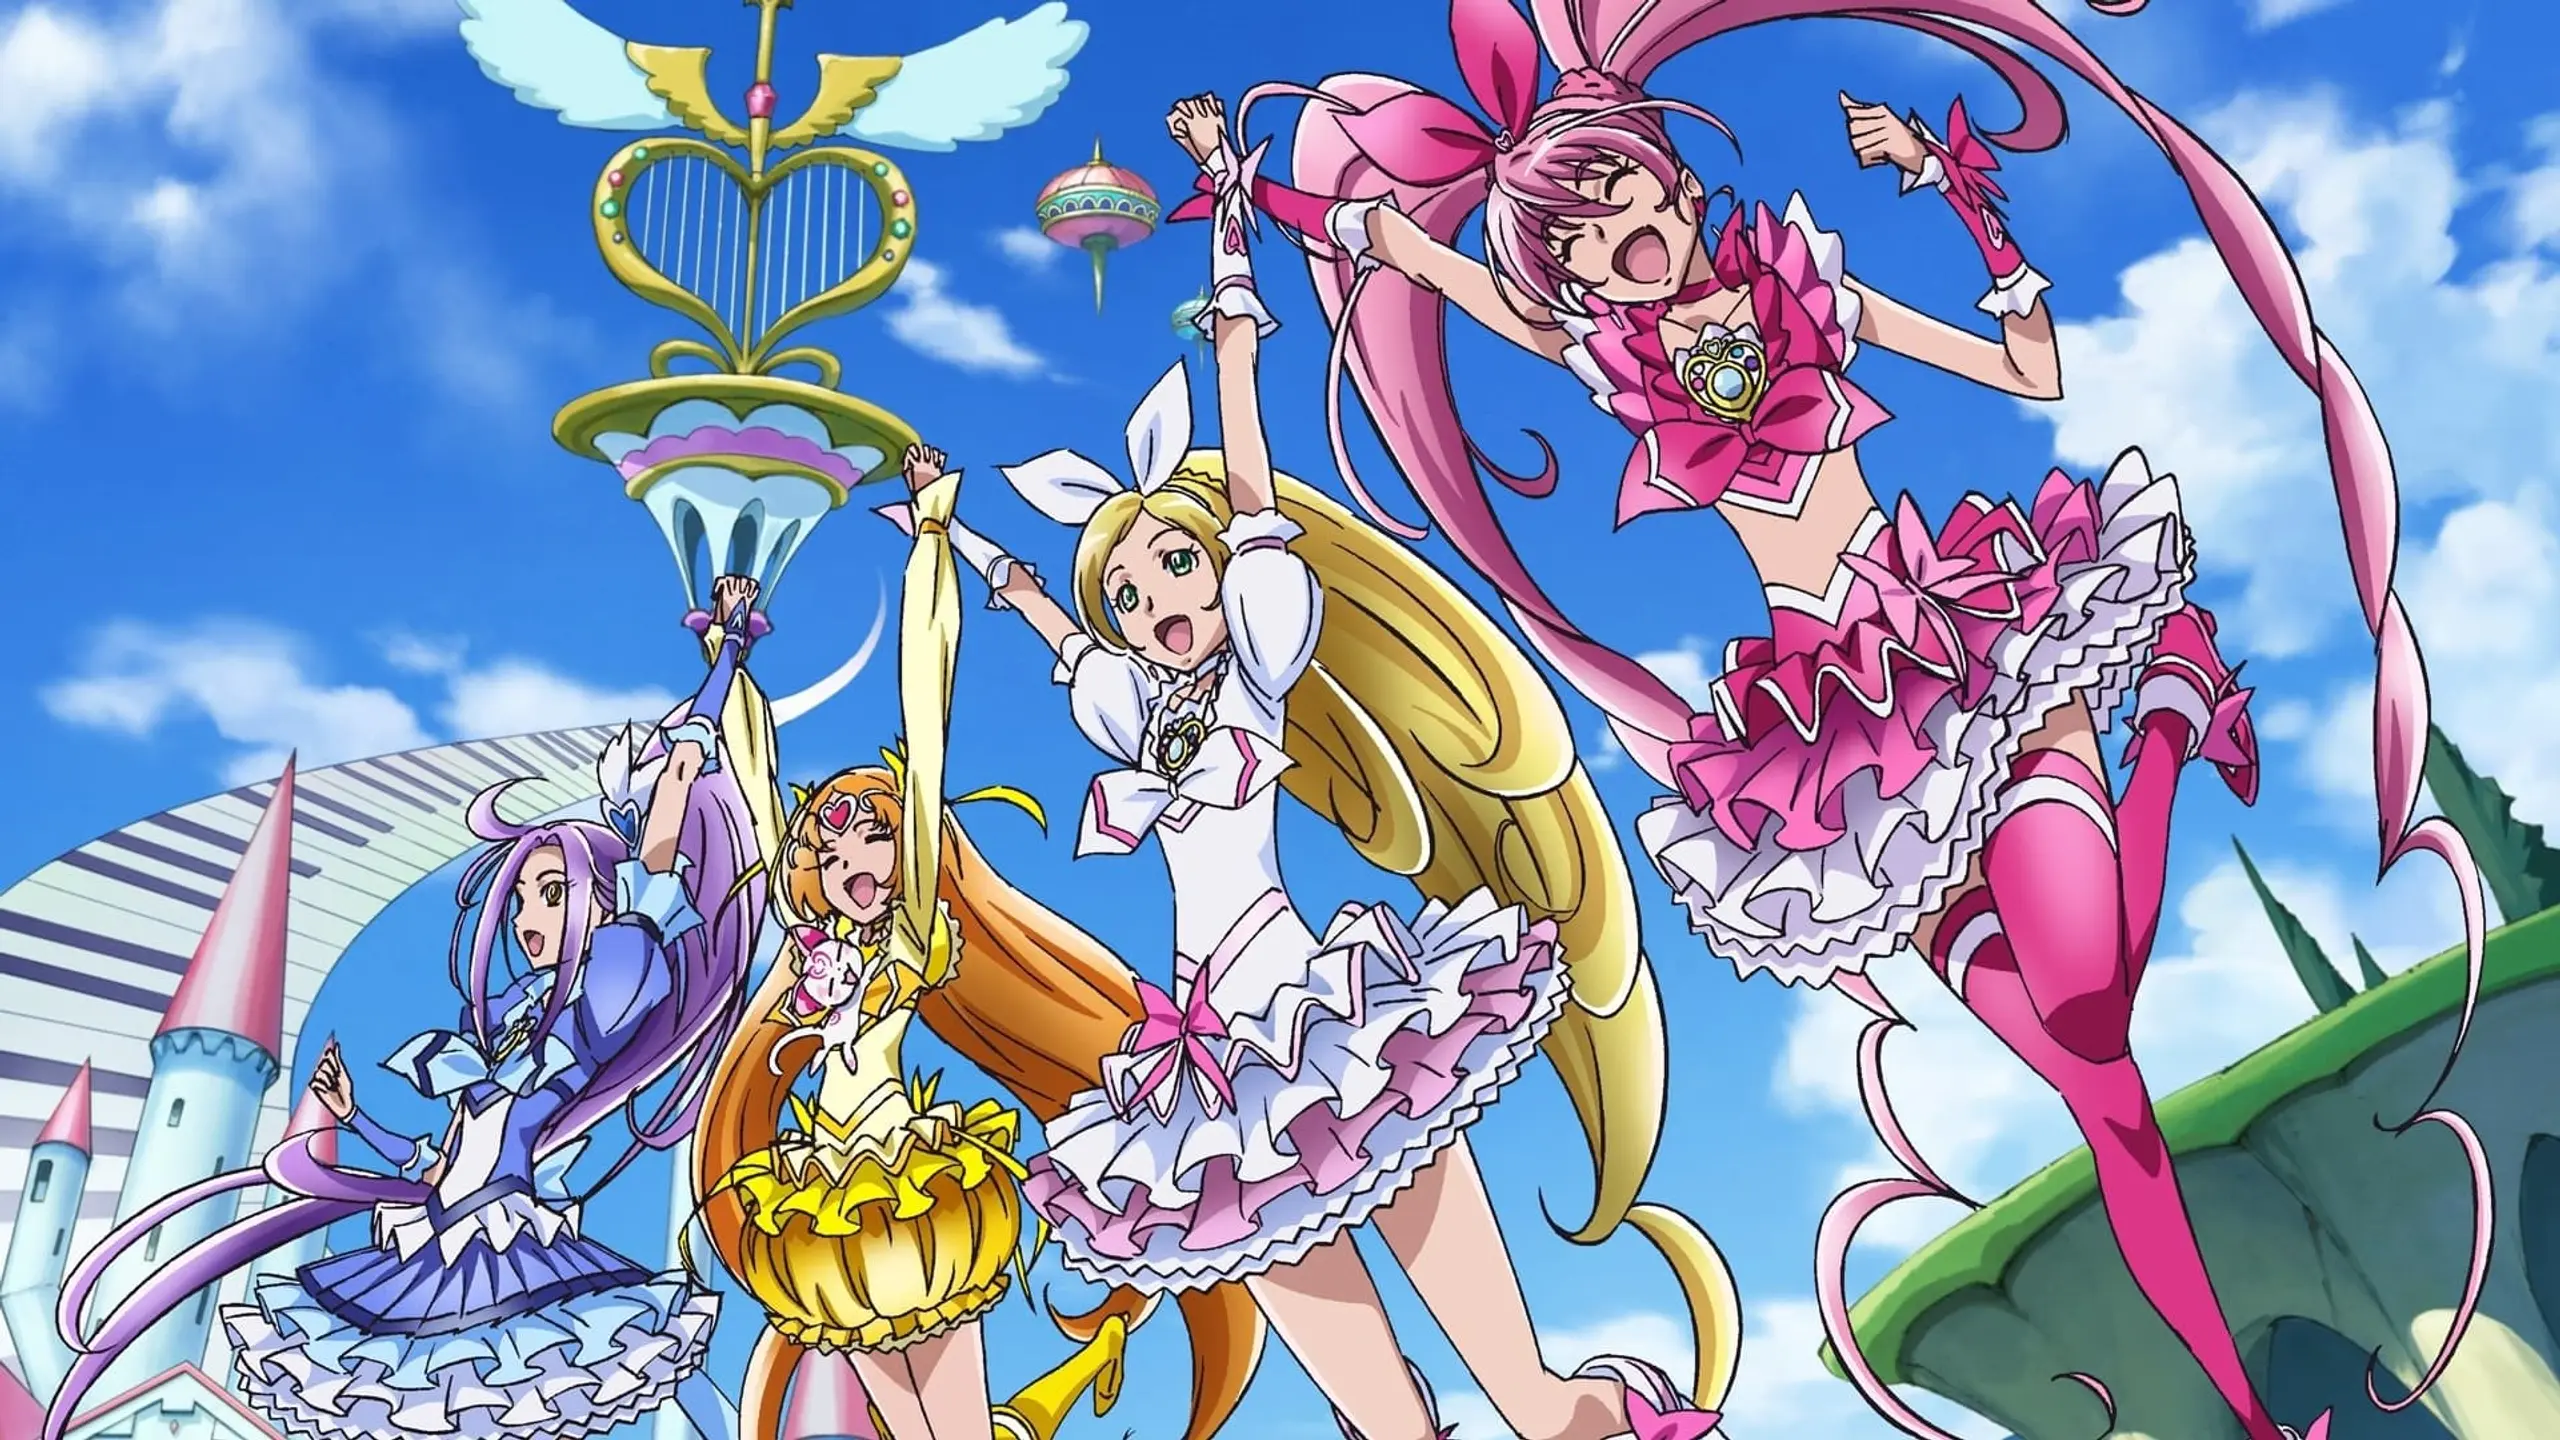 Pretty Cure Movie 8 Take it back! The Miraculous Melody that Connects Hearts!